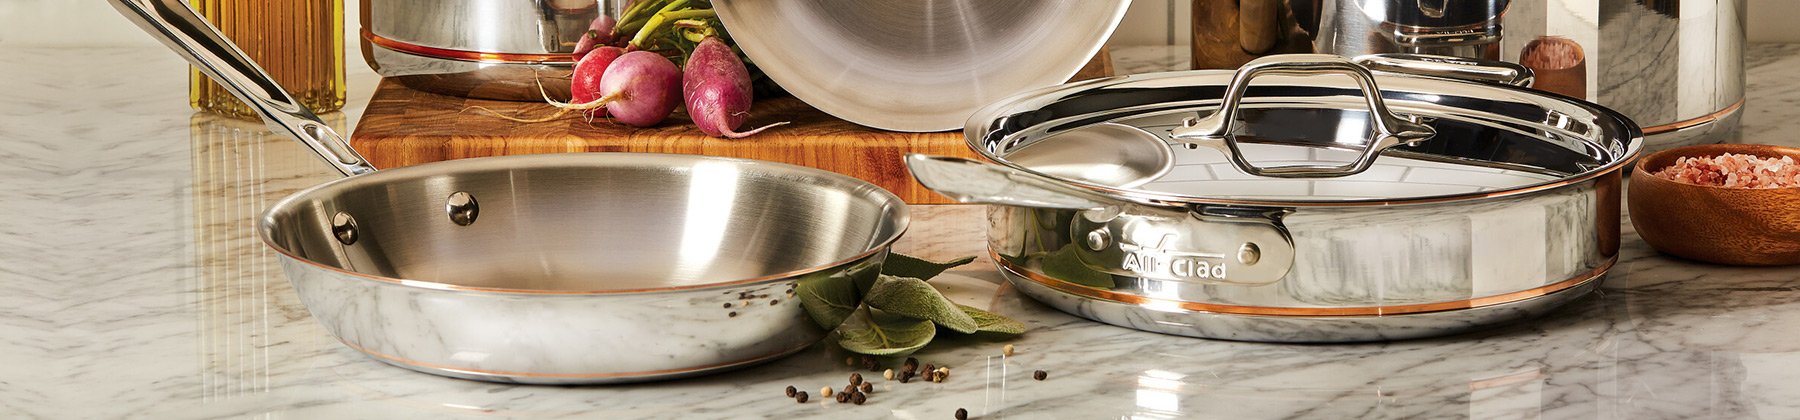 Photo of All-Clad Copper Core Cookware.